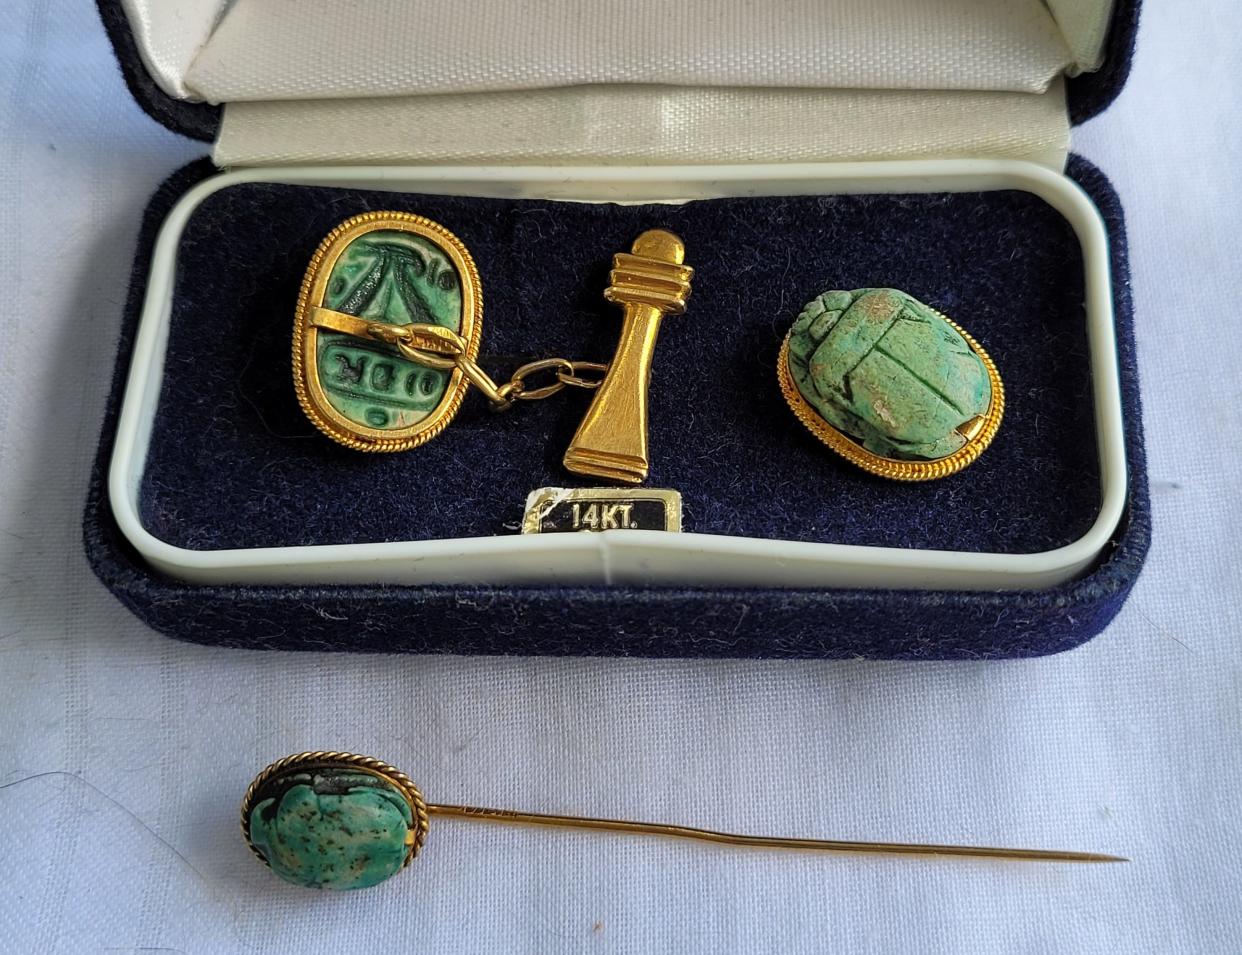 These scarab cufflinks and tie tack appear to be of a high-quality standard.